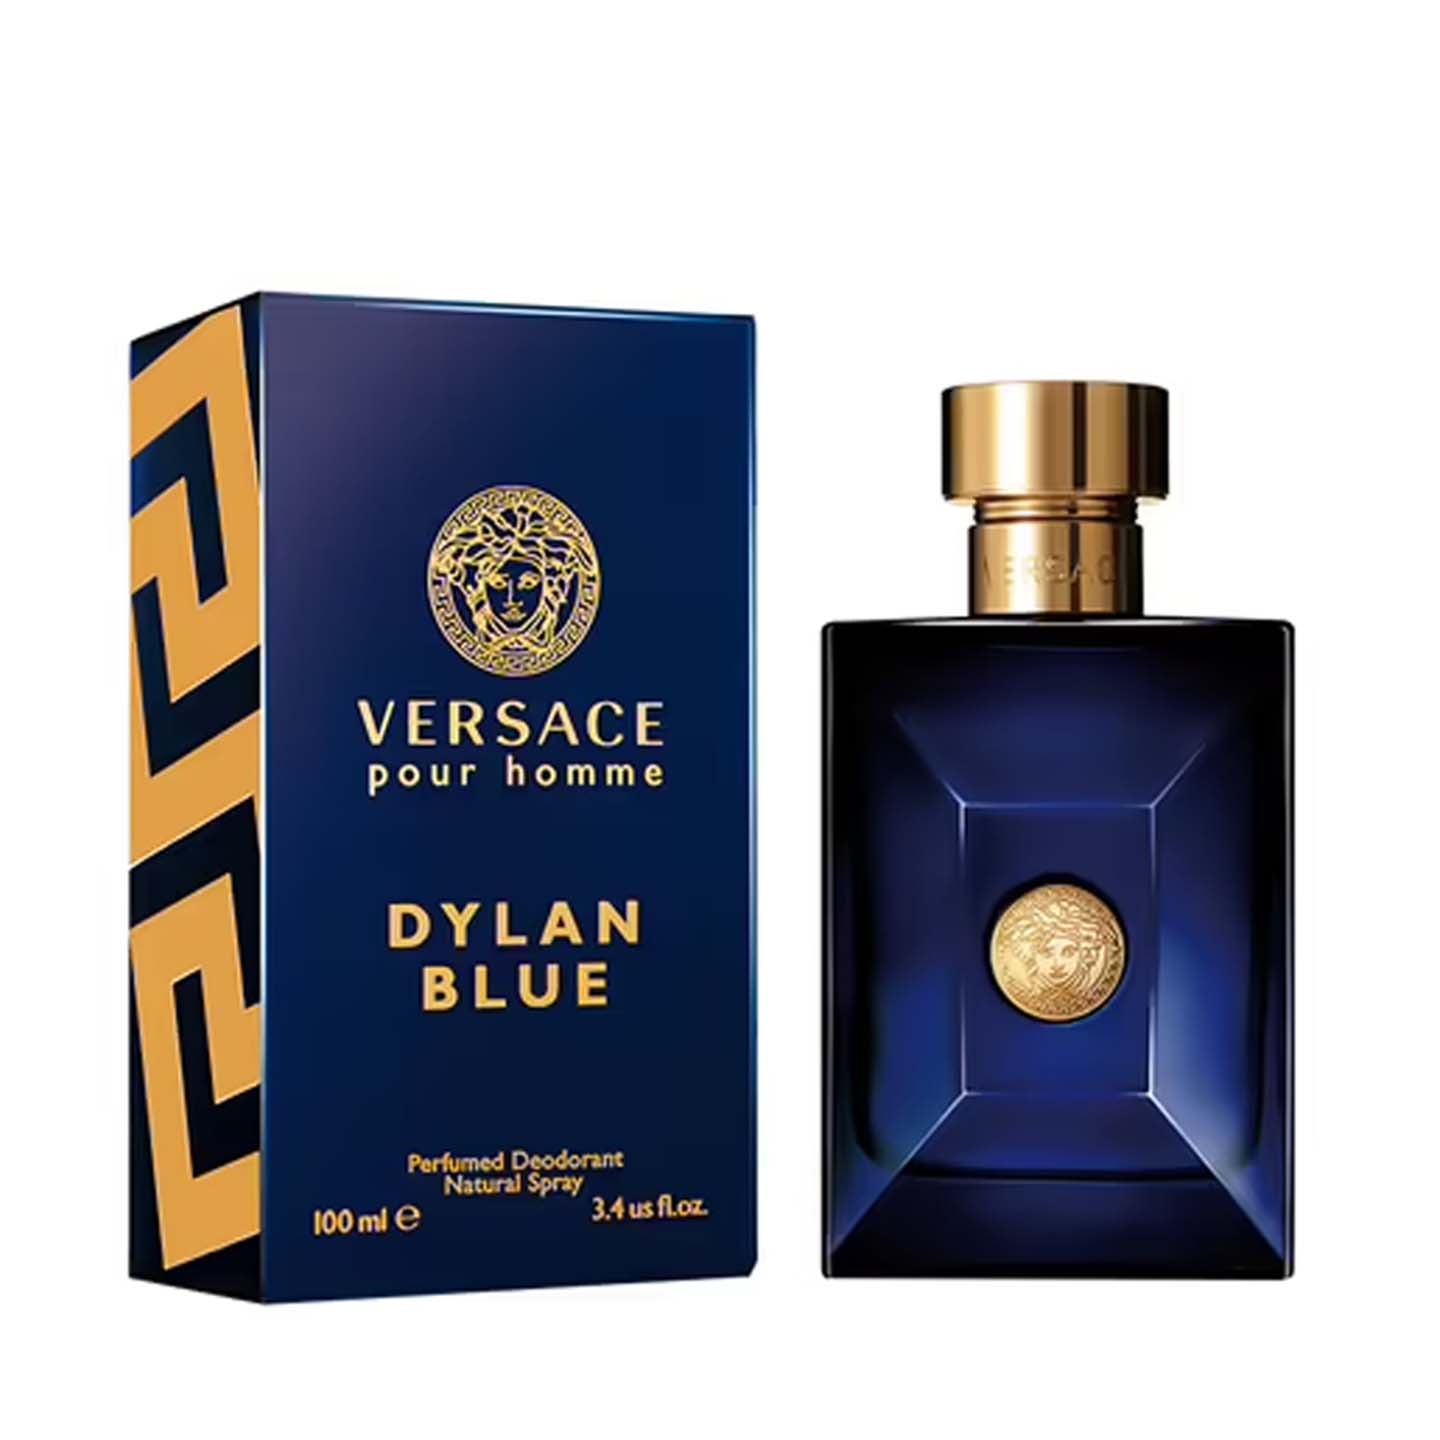 Versace Pour Homme Dylan Blue Perfumed Deodorant - 100ml